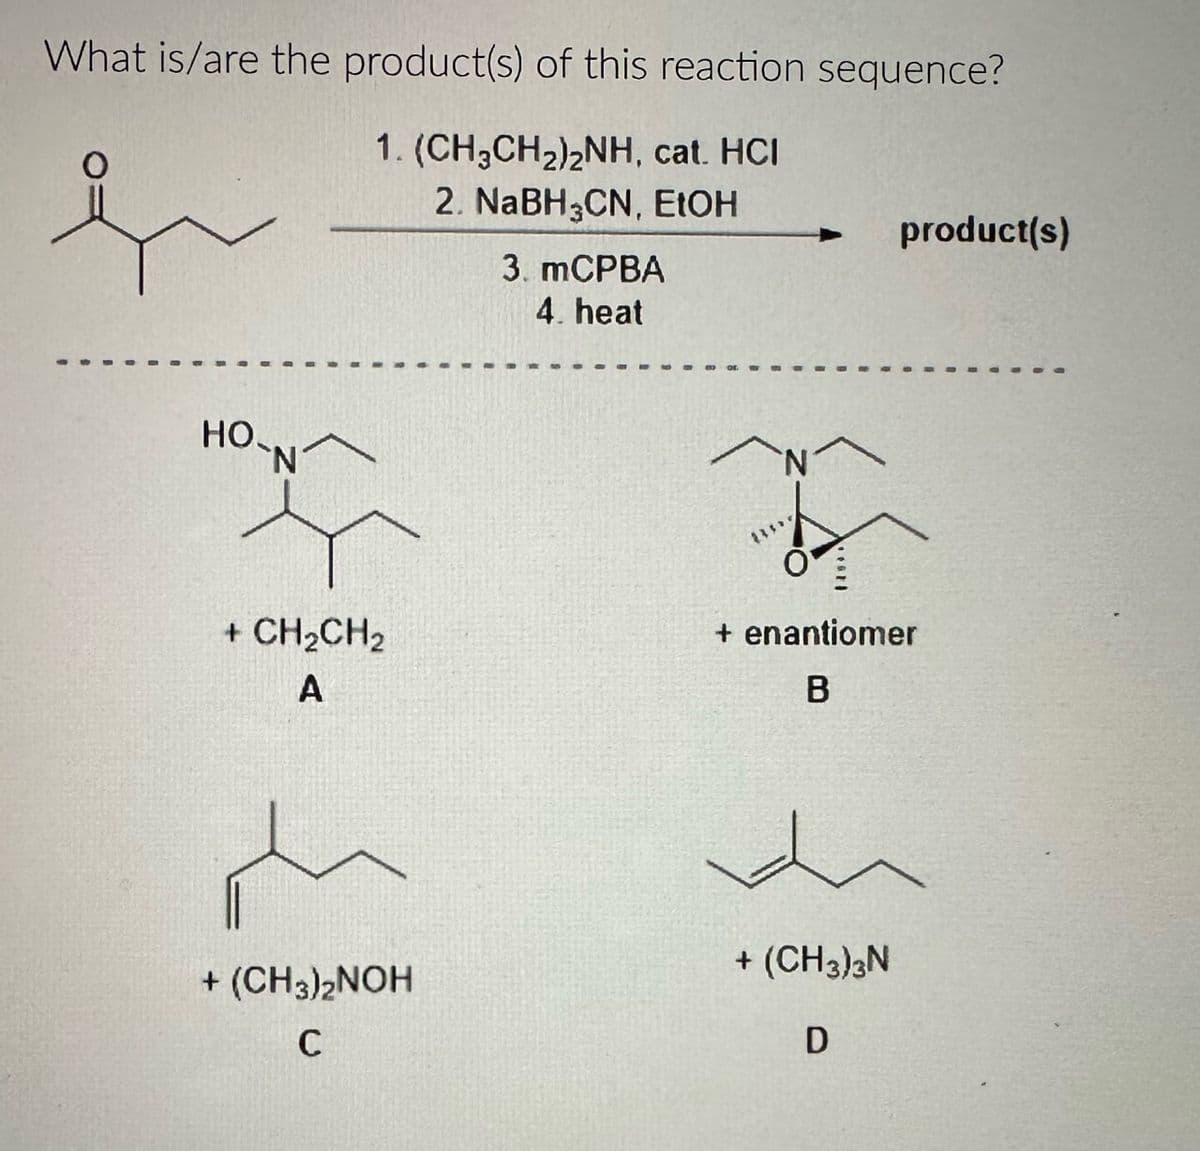 What is/are the product(s) of this reaction sequence?
1. (CH3CH2)2NH, cat. HCI
2. NaBH3CN, EtOH
3. MCPBA
4. heat
product(s)
HO-N^
+ CH2CH2
A
+ enantiomer
B
+ (CH3)3N
+ (CH3)2NOH
C
D